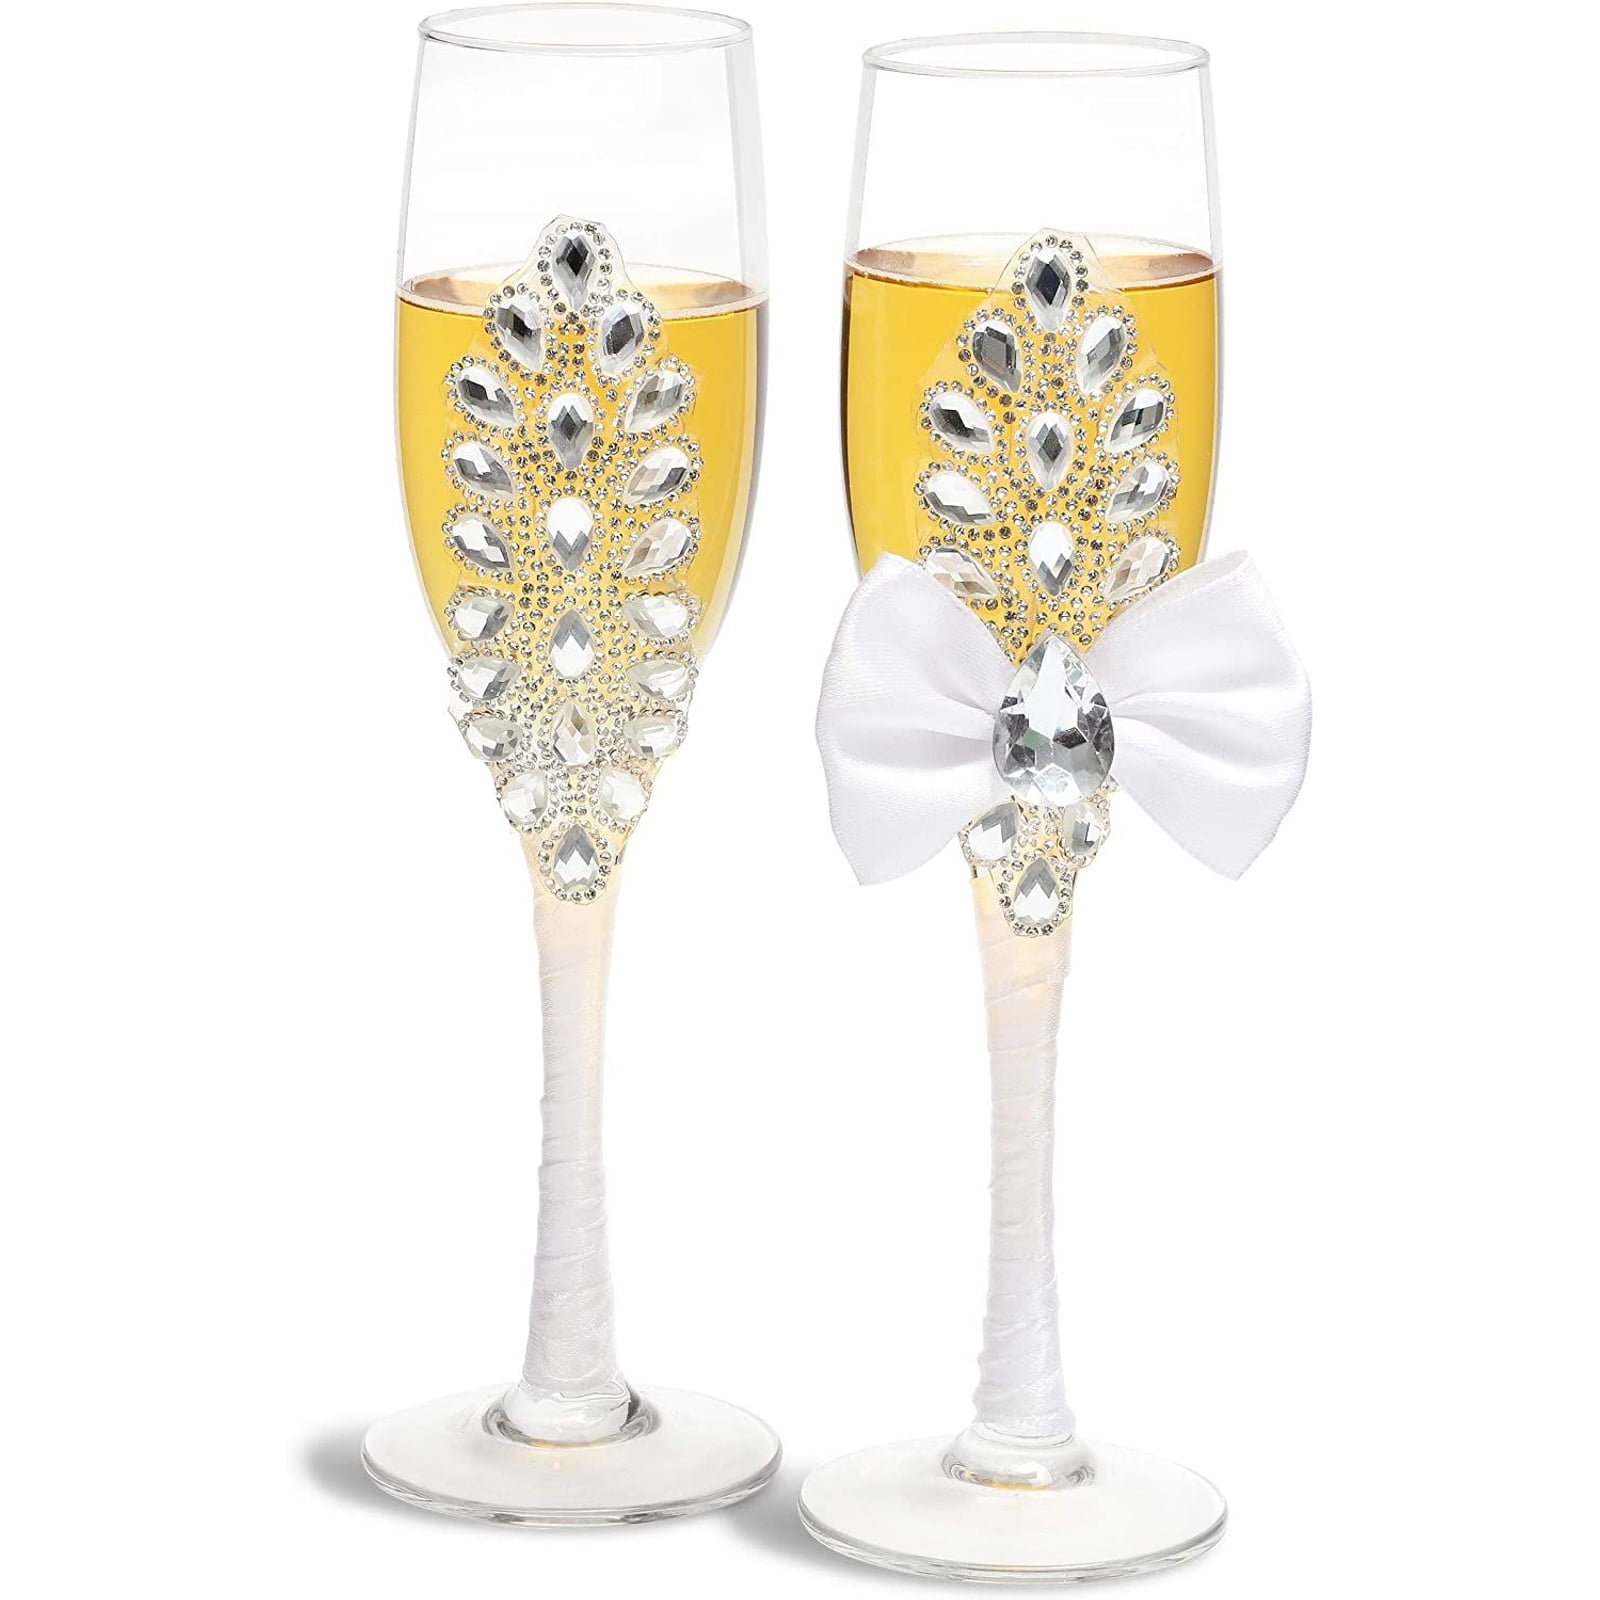 Mr and Mrs Bride and Groom Personalized Champagne Flutes Champagne Flutes 